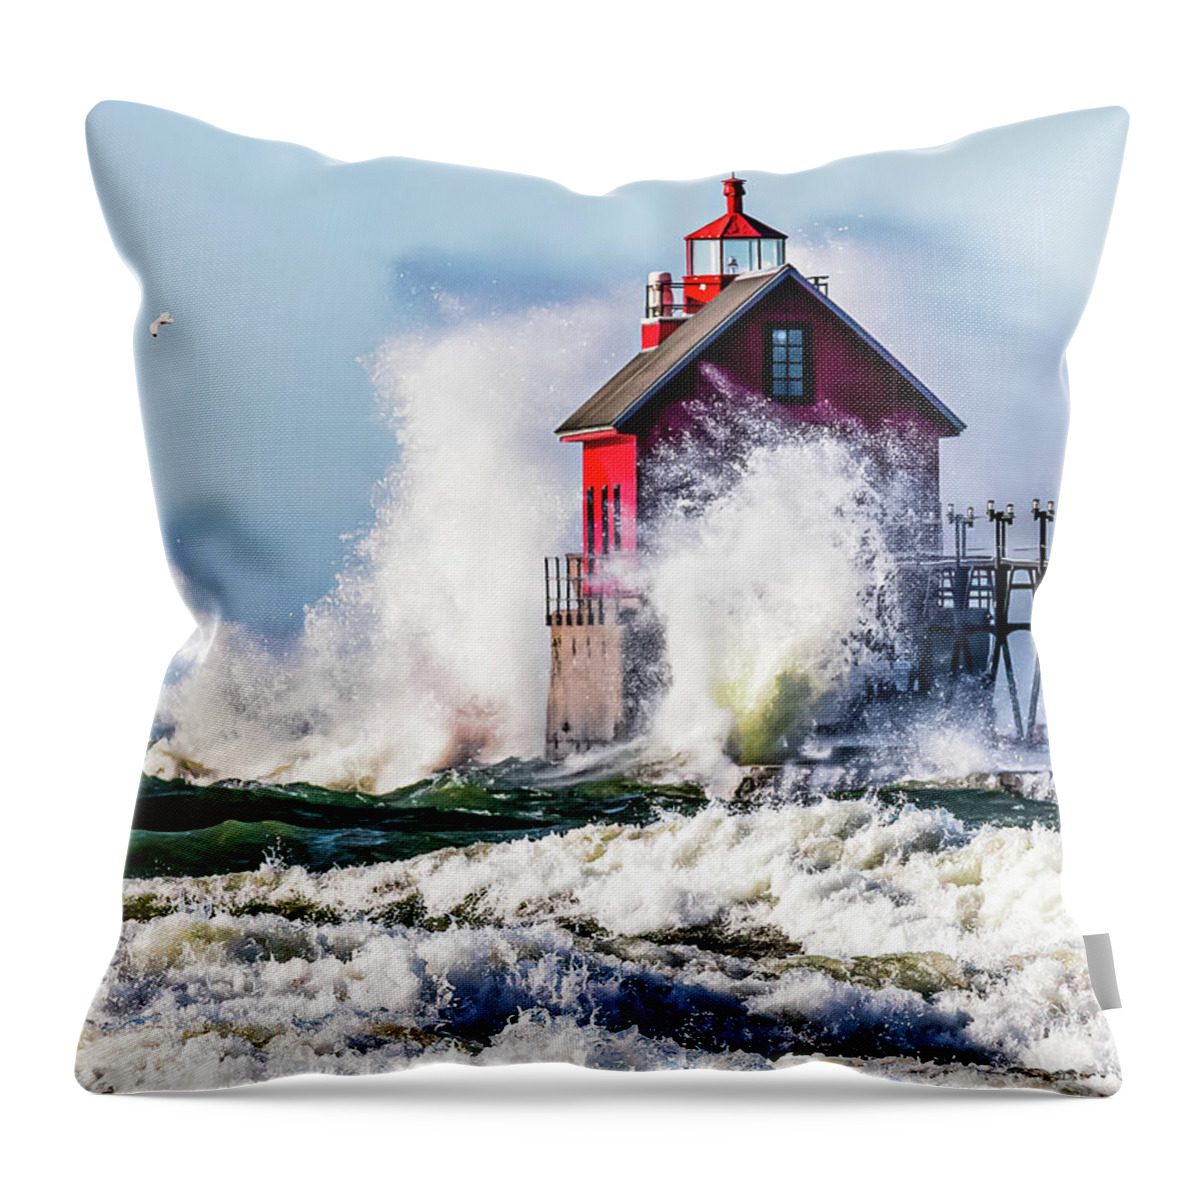 Lake Michigan Throw Pillow featuring the photograph Grand Haven Splash by Joe Holley